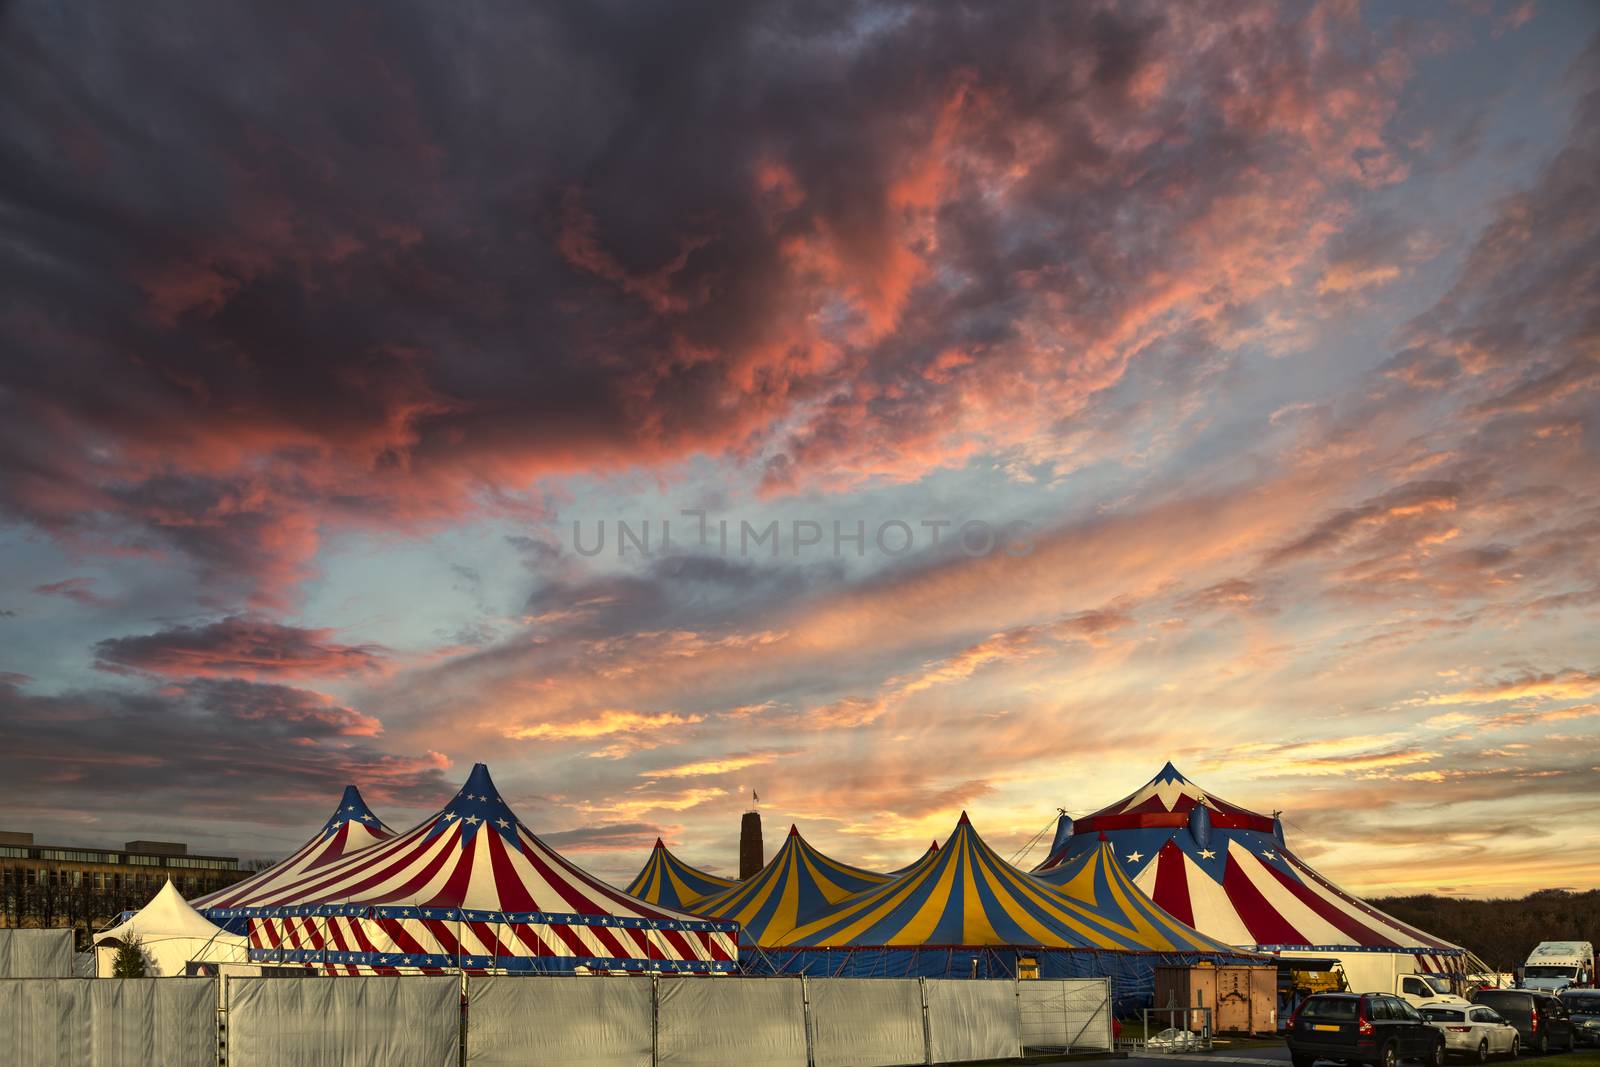 Red and white circus tents topped with bleu starred cover against a sunny blue sky with clouds by ankorlight